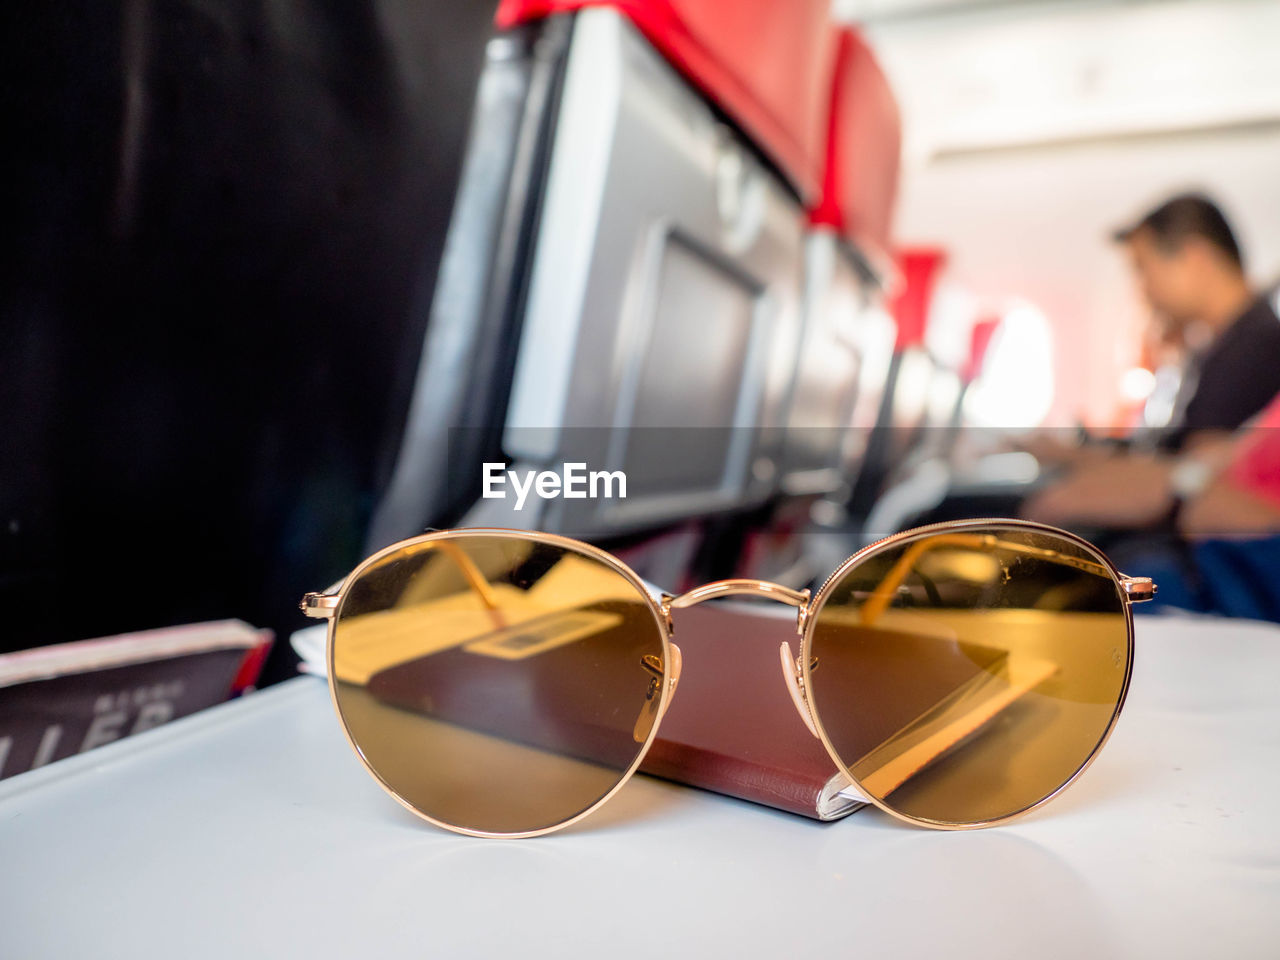 CLOSE-UP OF SUNGLASSES WITH REFLECTION ON GLASS TABLE